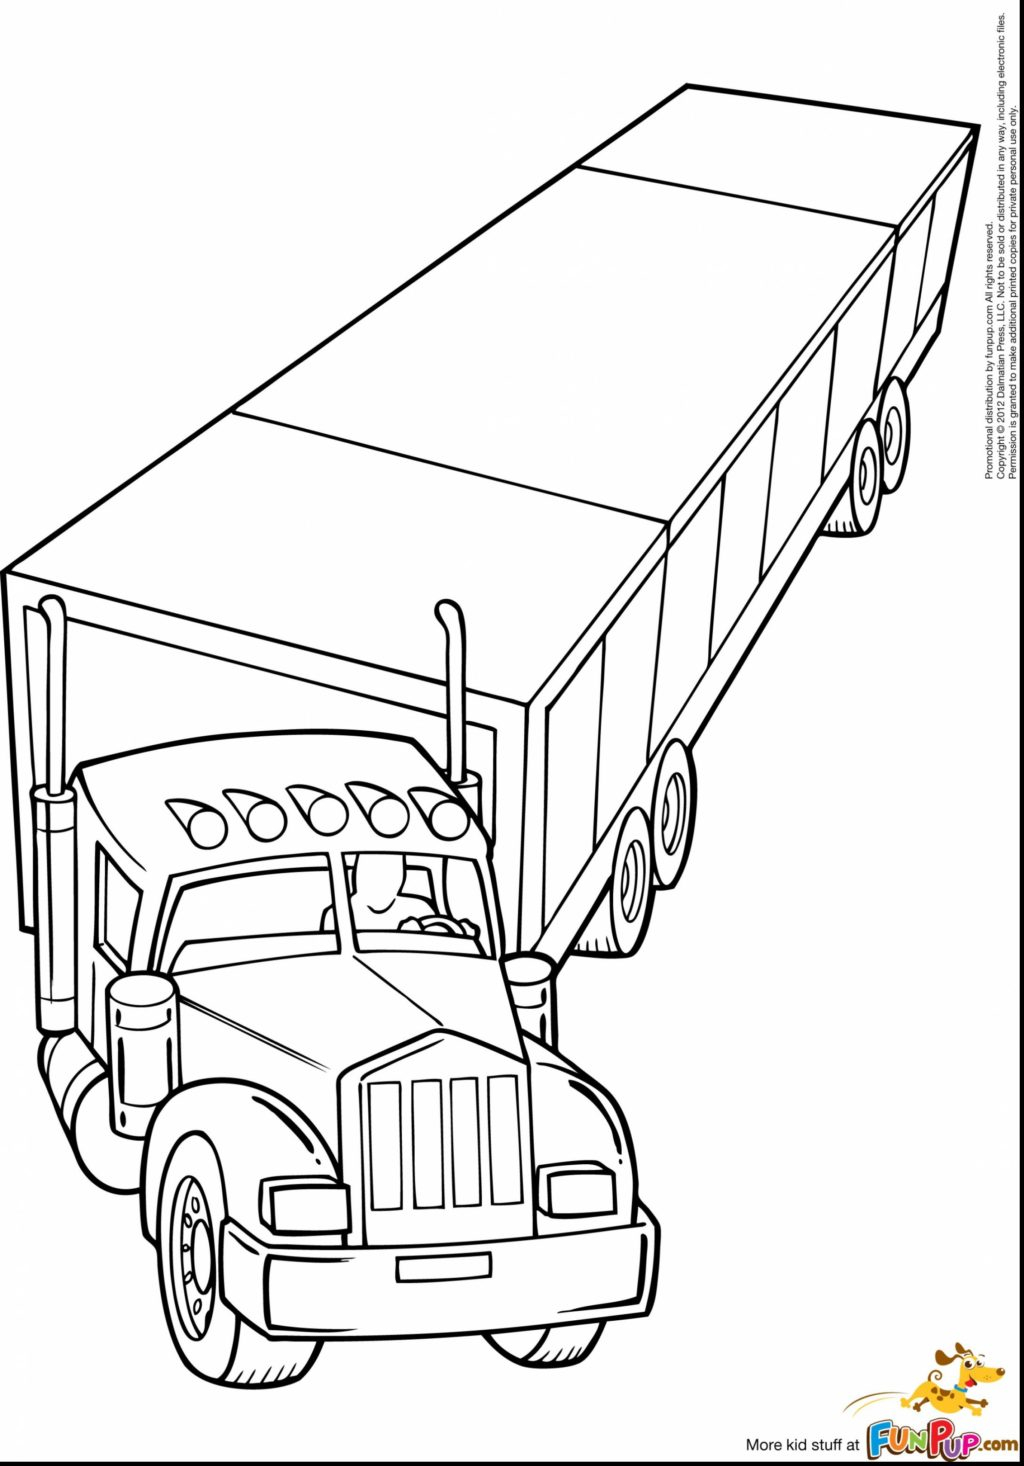 Big Truck Coloring Pages Coloring Book World Semi Truck Coloring Pages To Print Pictures